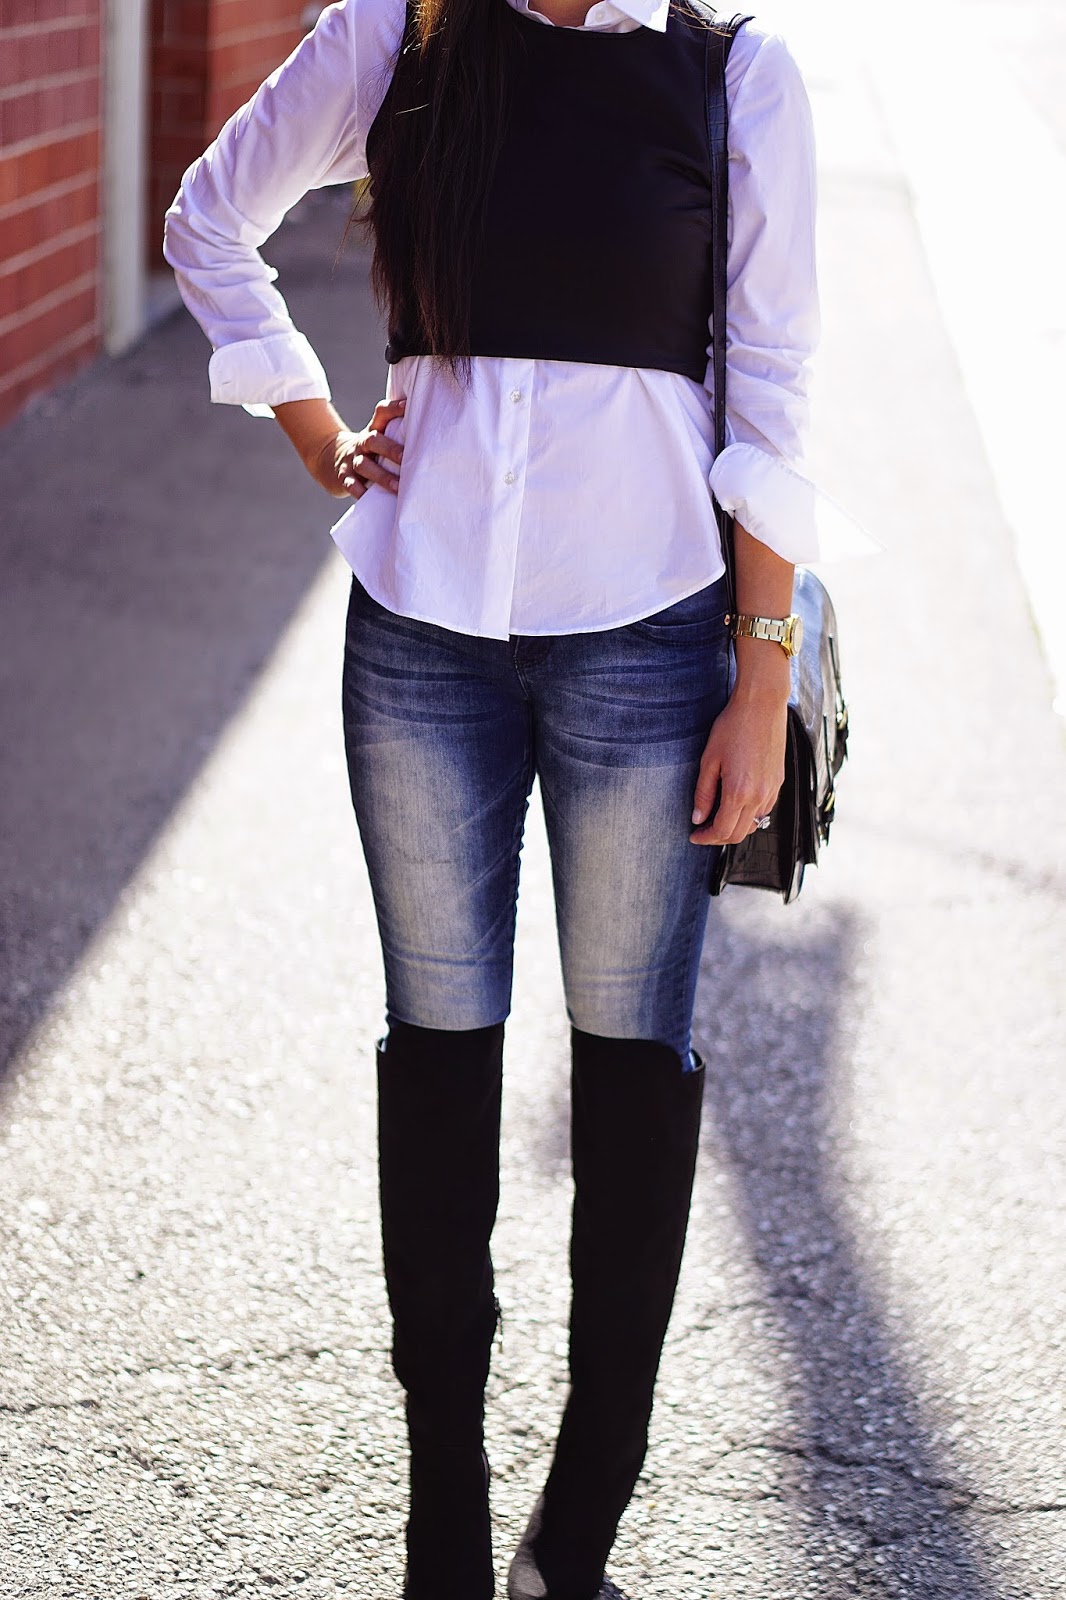 ... YMI Jeans, YMI Jeans, JCPenney, Black Knee High Boots, Forever 21, How